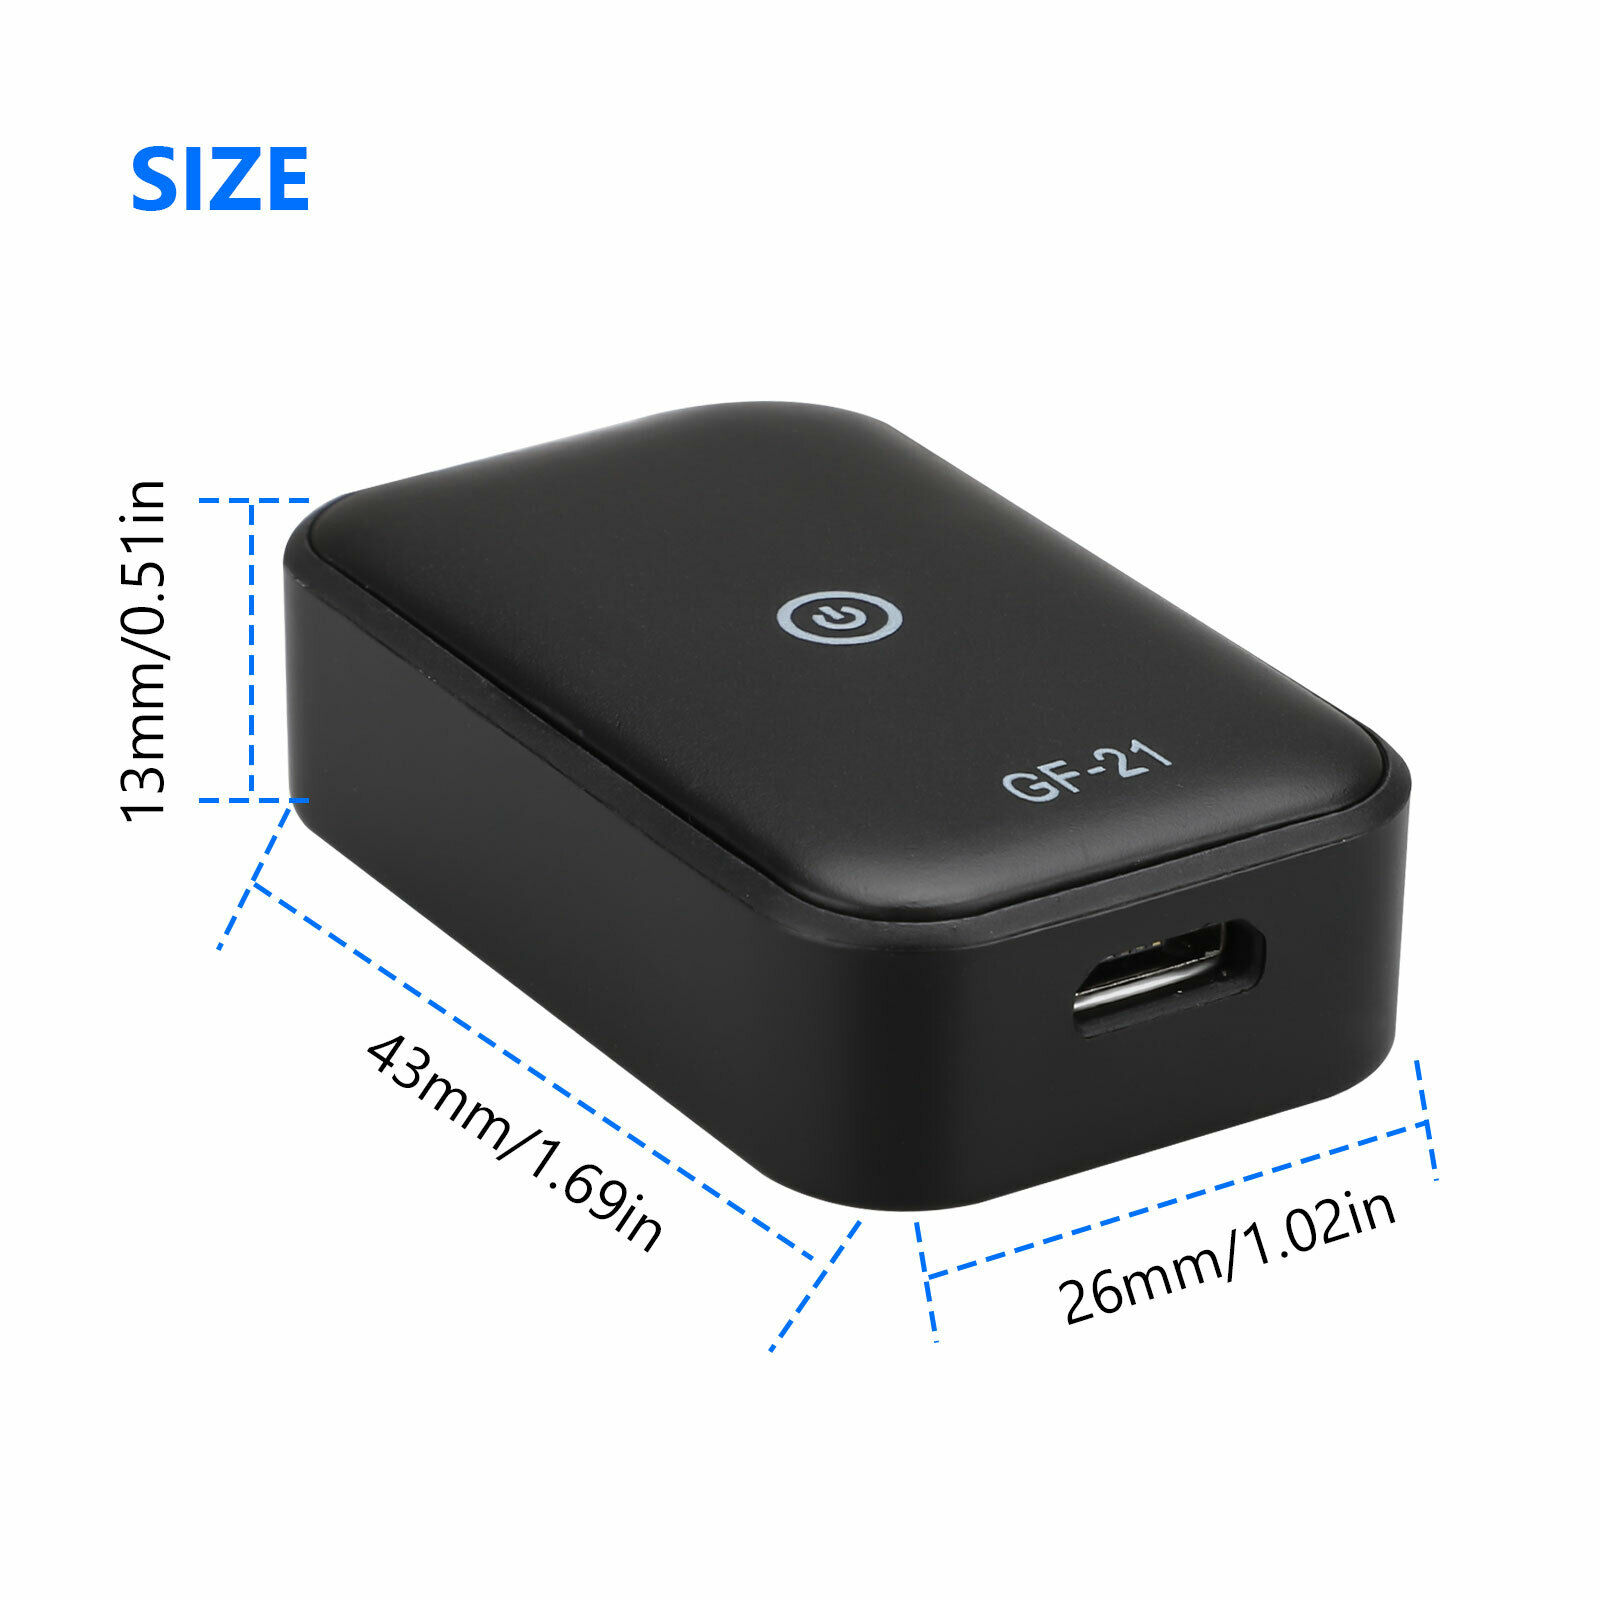 Mini Real Time GPS Tracking Device with Sos Voice Monitor GPS/WiFi/Lbs Locator